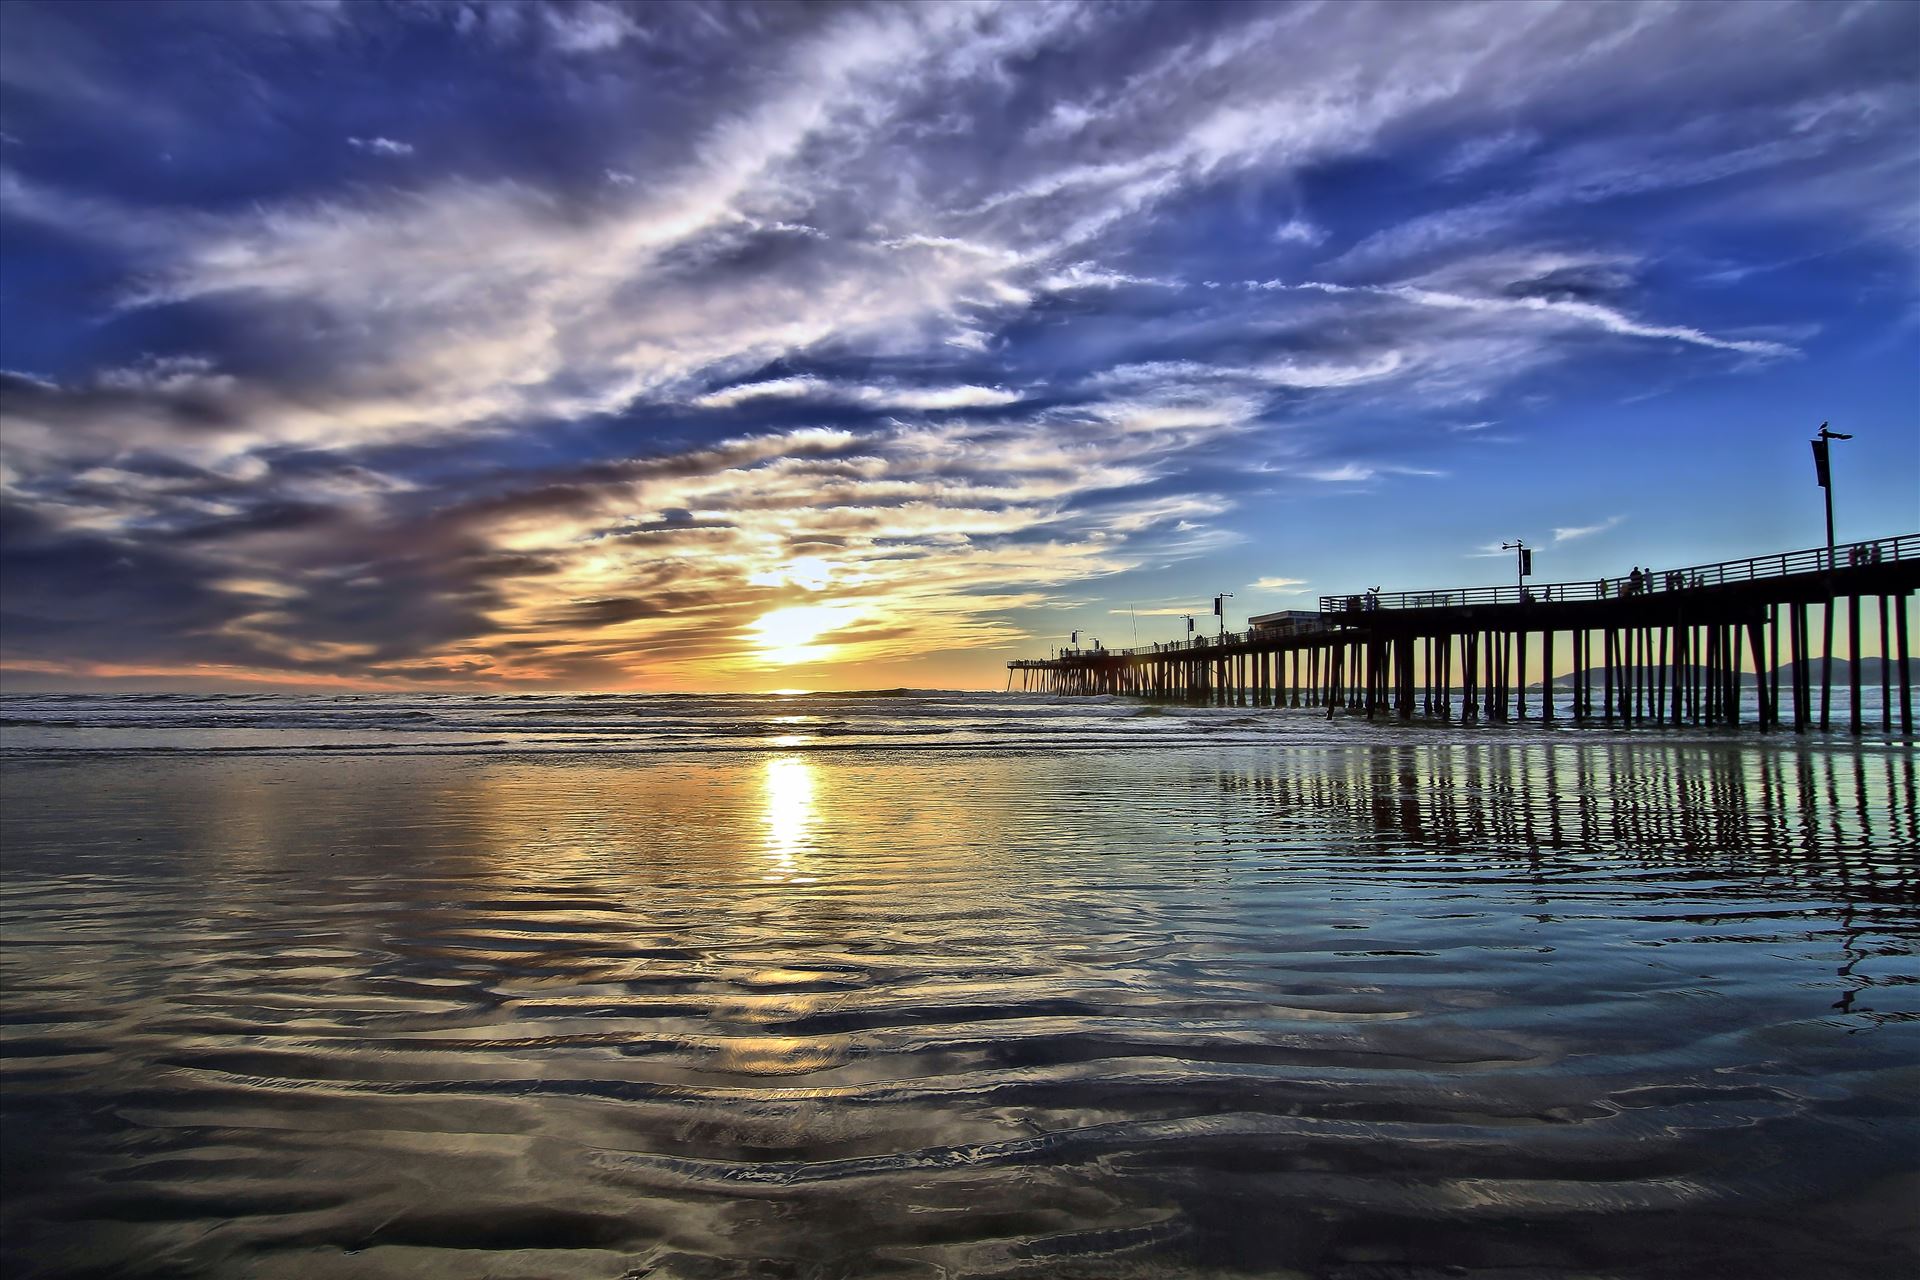 Pismo Pier Sunset Reflections of the Pismo Beach Pier on a silvery beach. by Emotions Photography